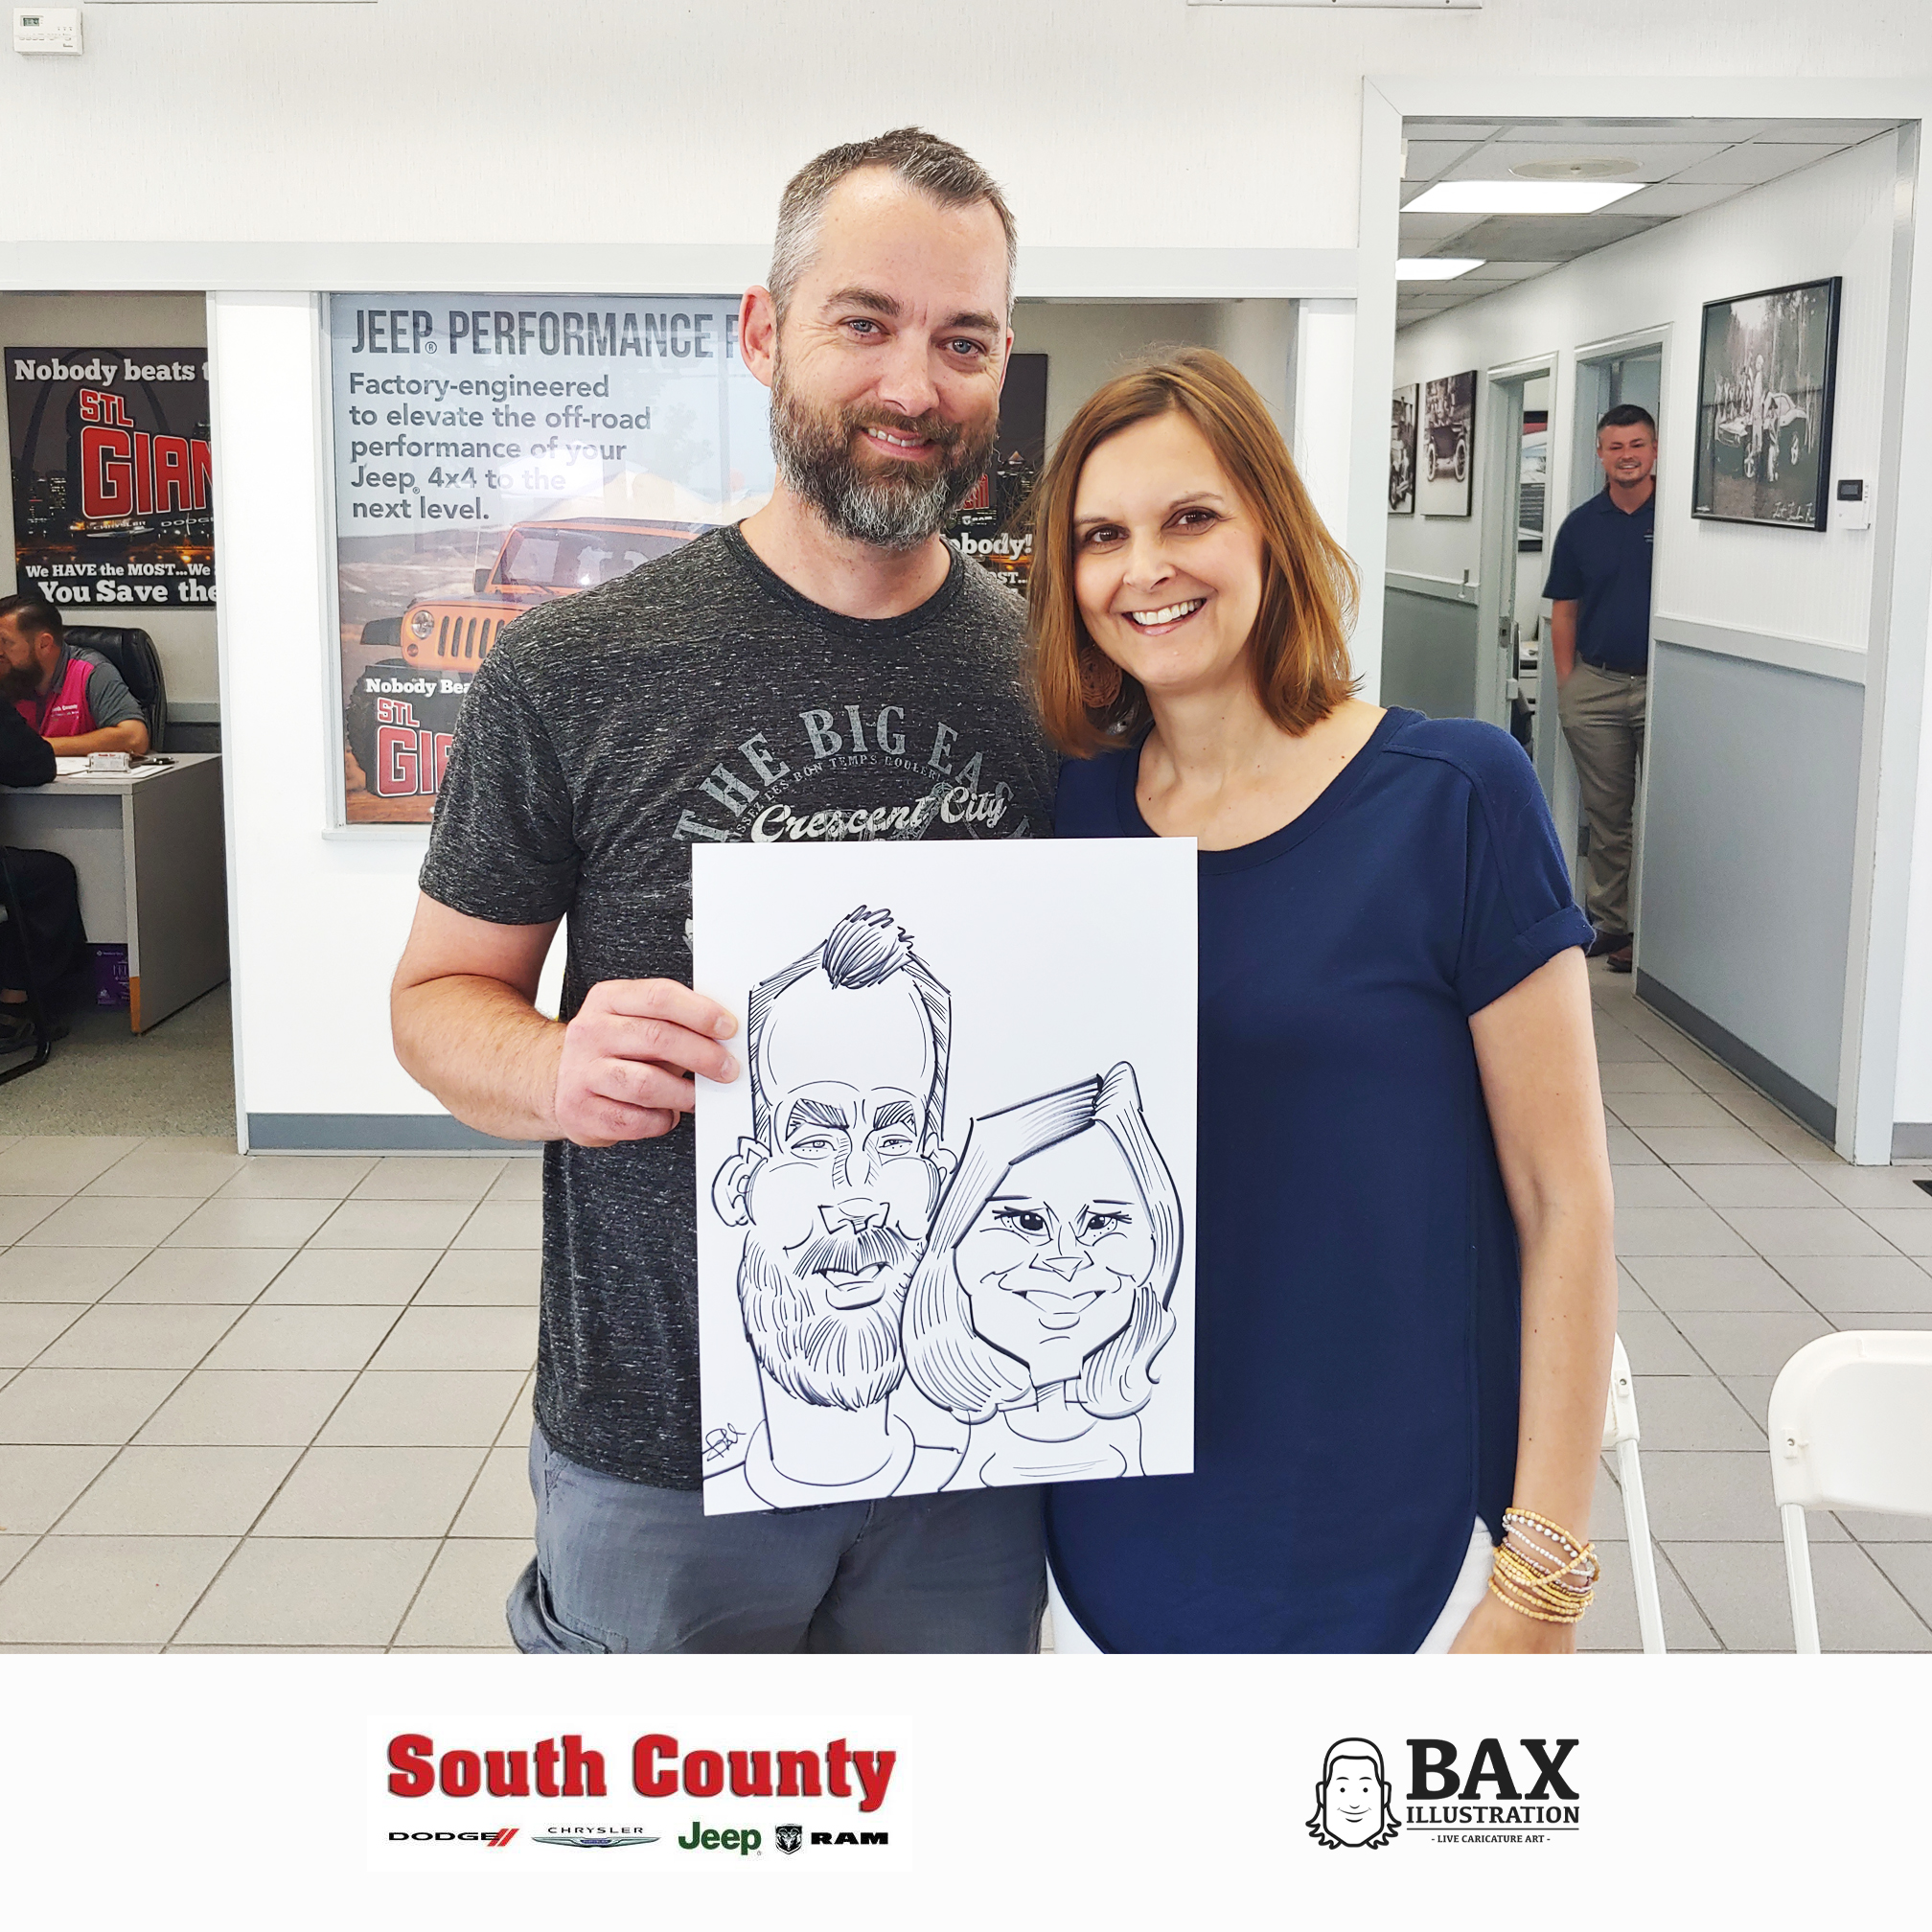 Couple holding caricature by Bax Illustration at South County Dodge Customer Appreciation Event in St. Louis